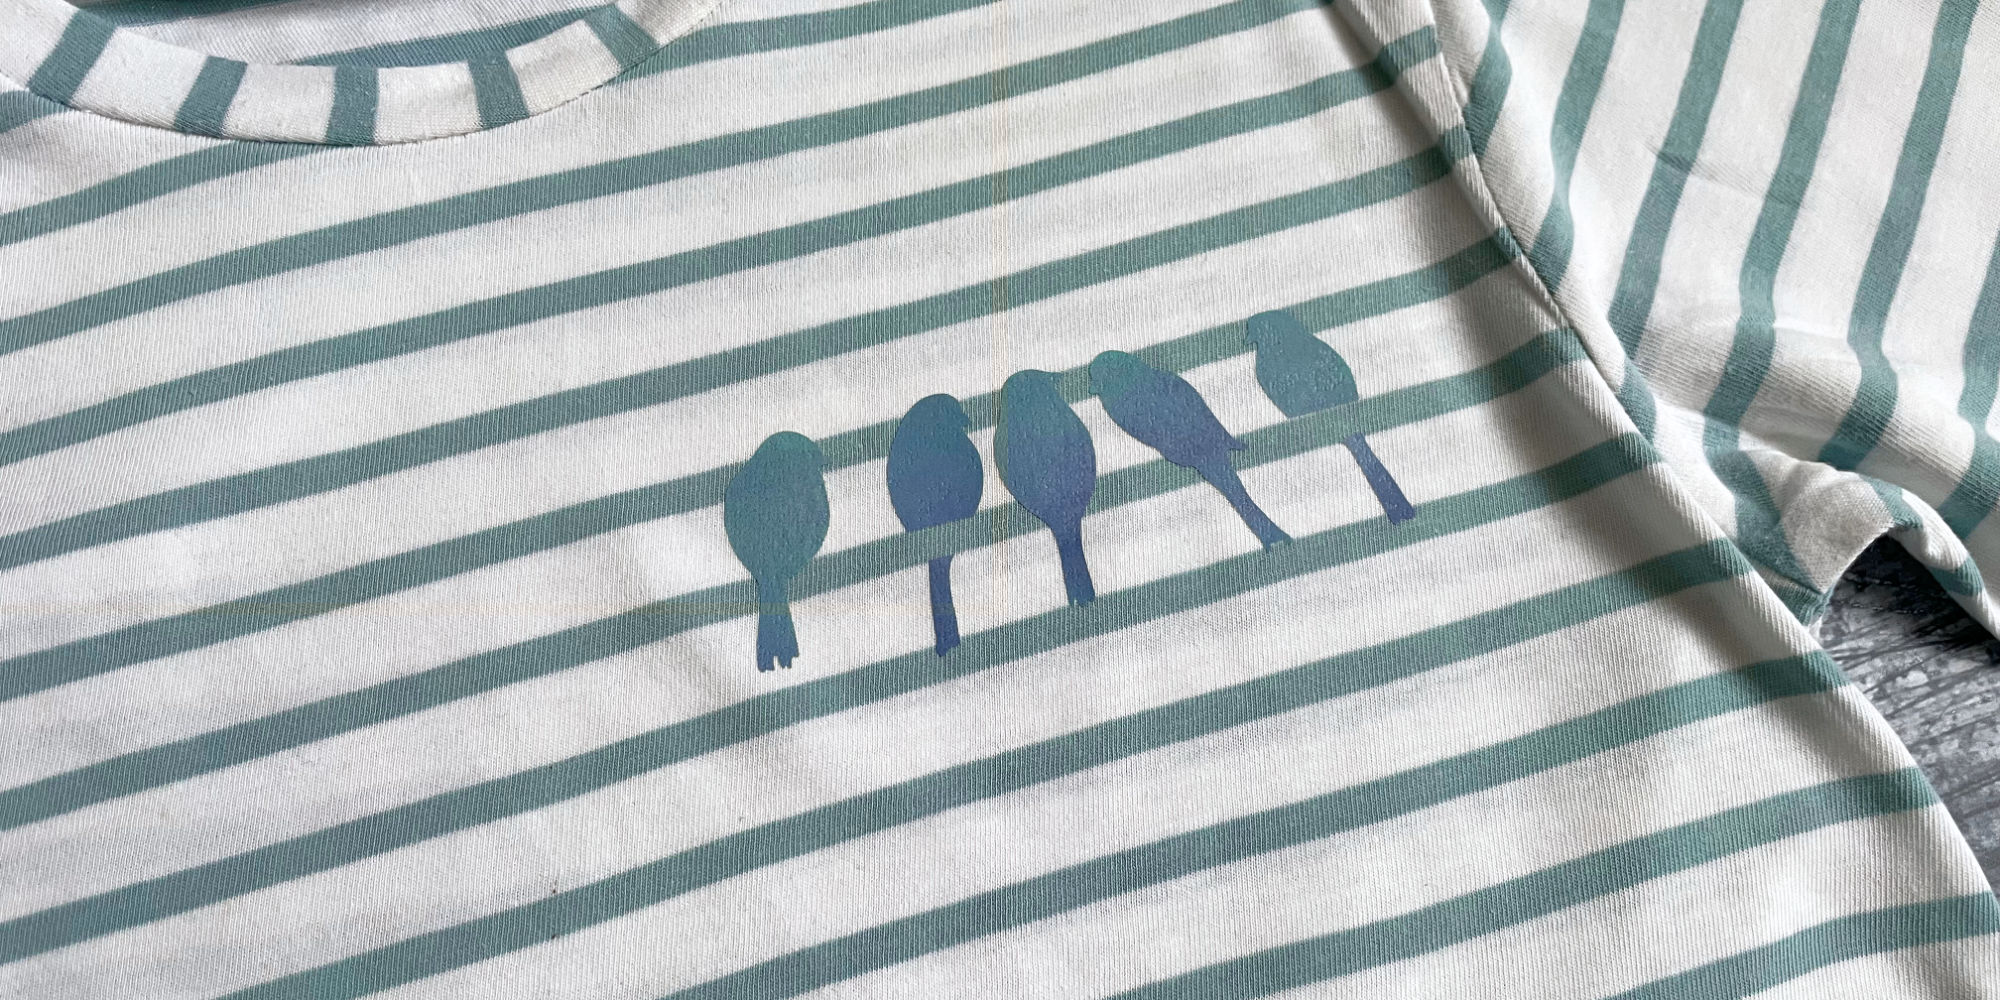 A row of five blue bird silhouettes on the line of a stripy top